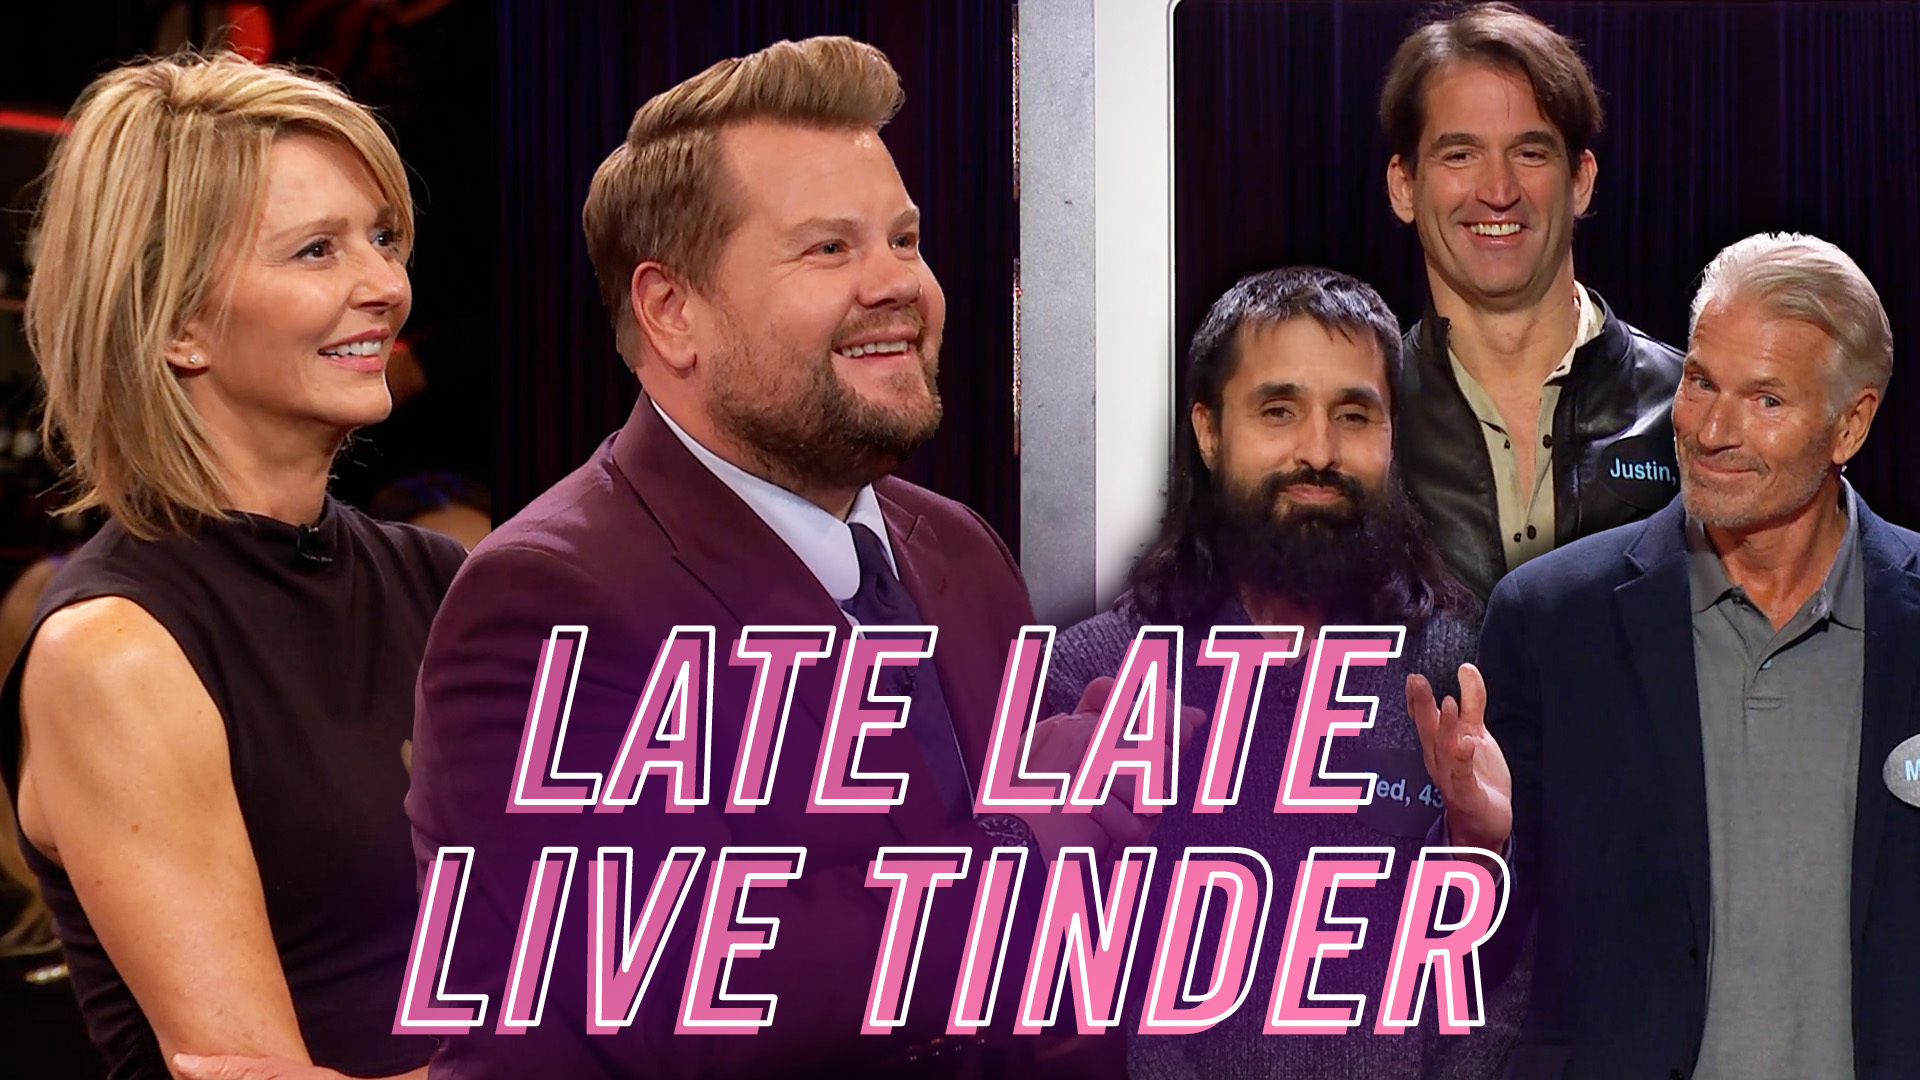 Watch the late late show with james corden late late live tinder â susan seeking love